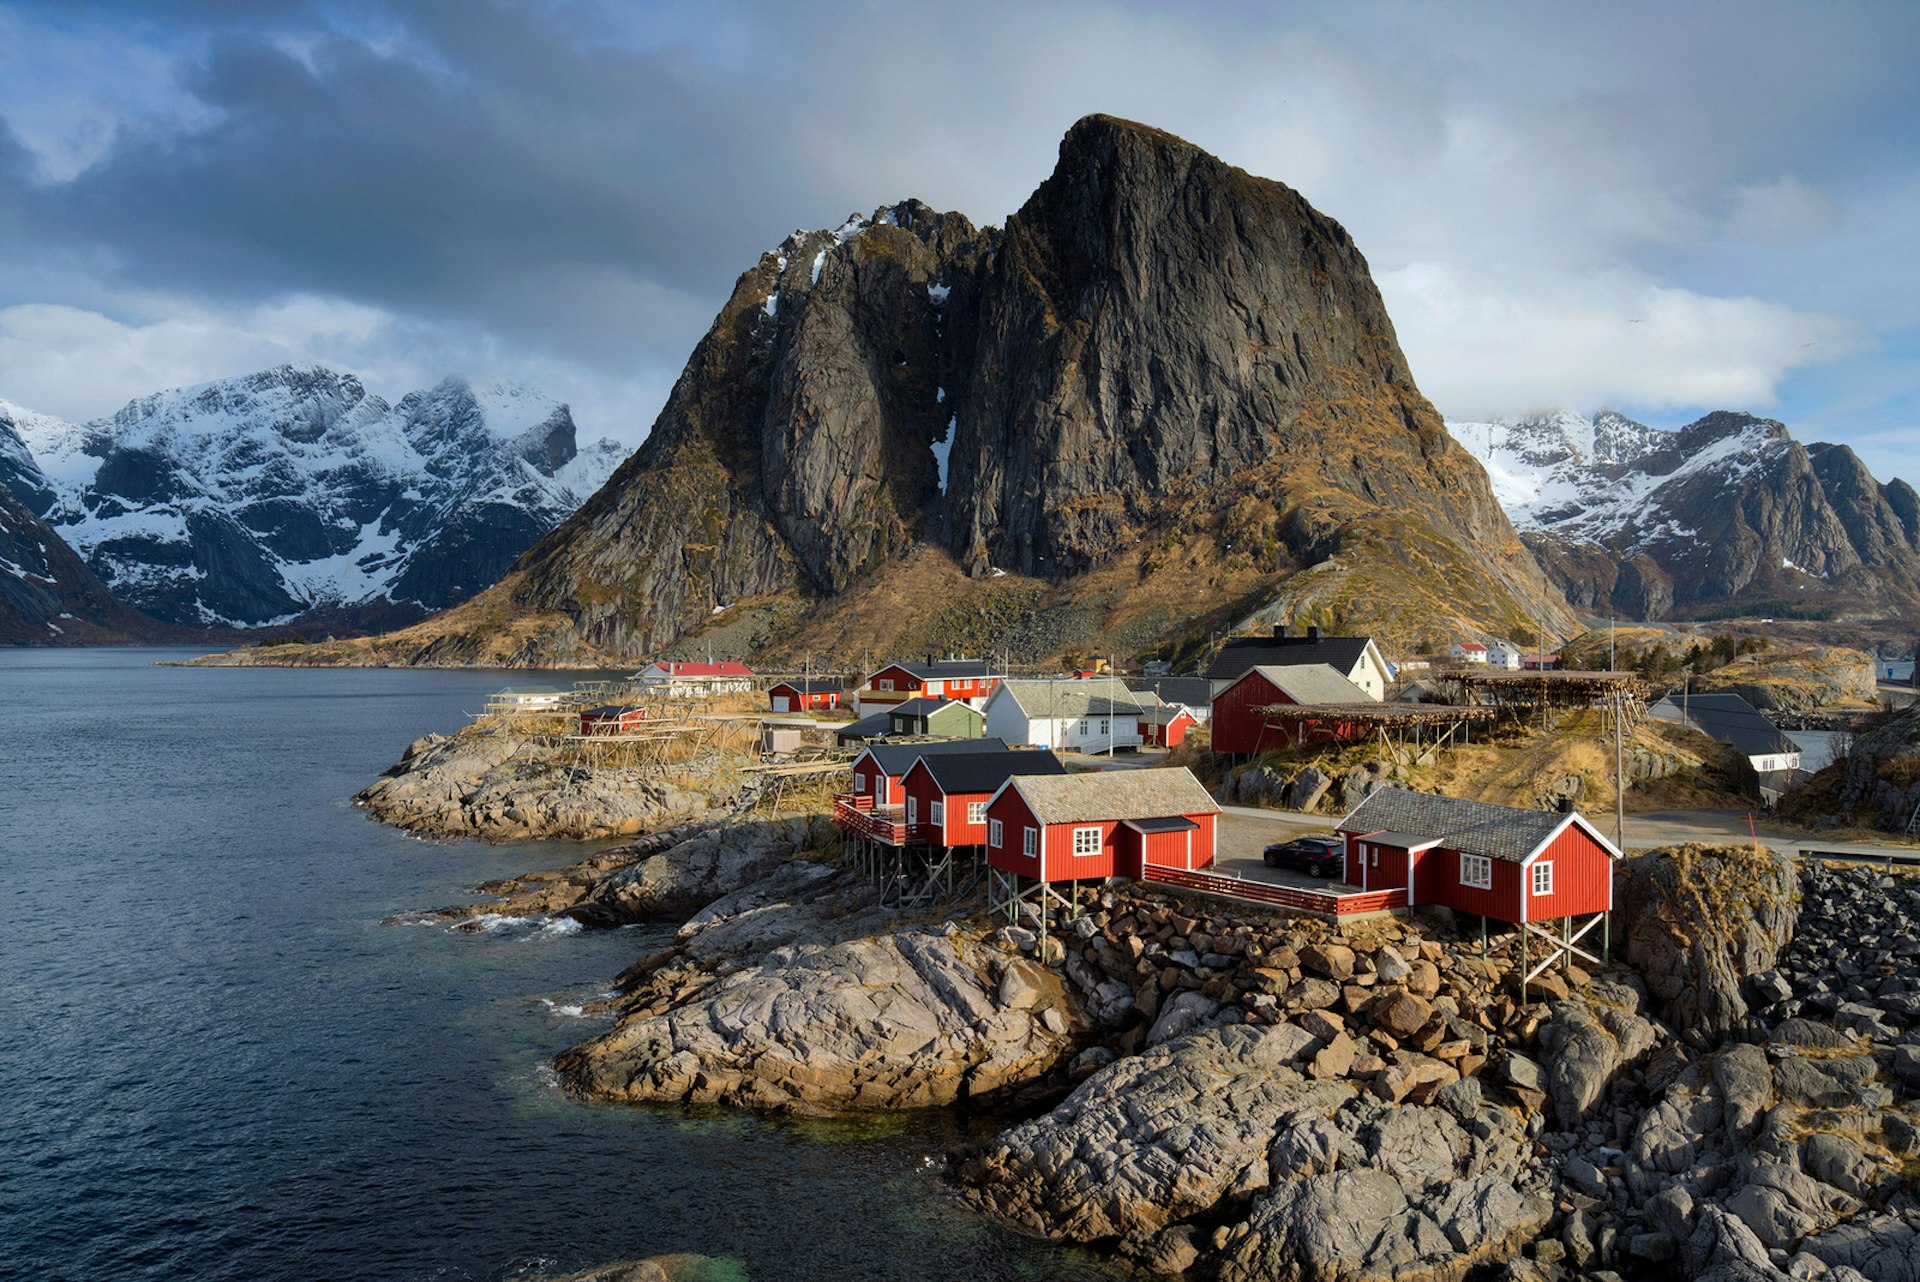 Hamnøy, a small fishing village in the Lofoten Islands, a highlight of the drive up Norway's Atlantic coast © Ketkam Sakultap / Getty Images